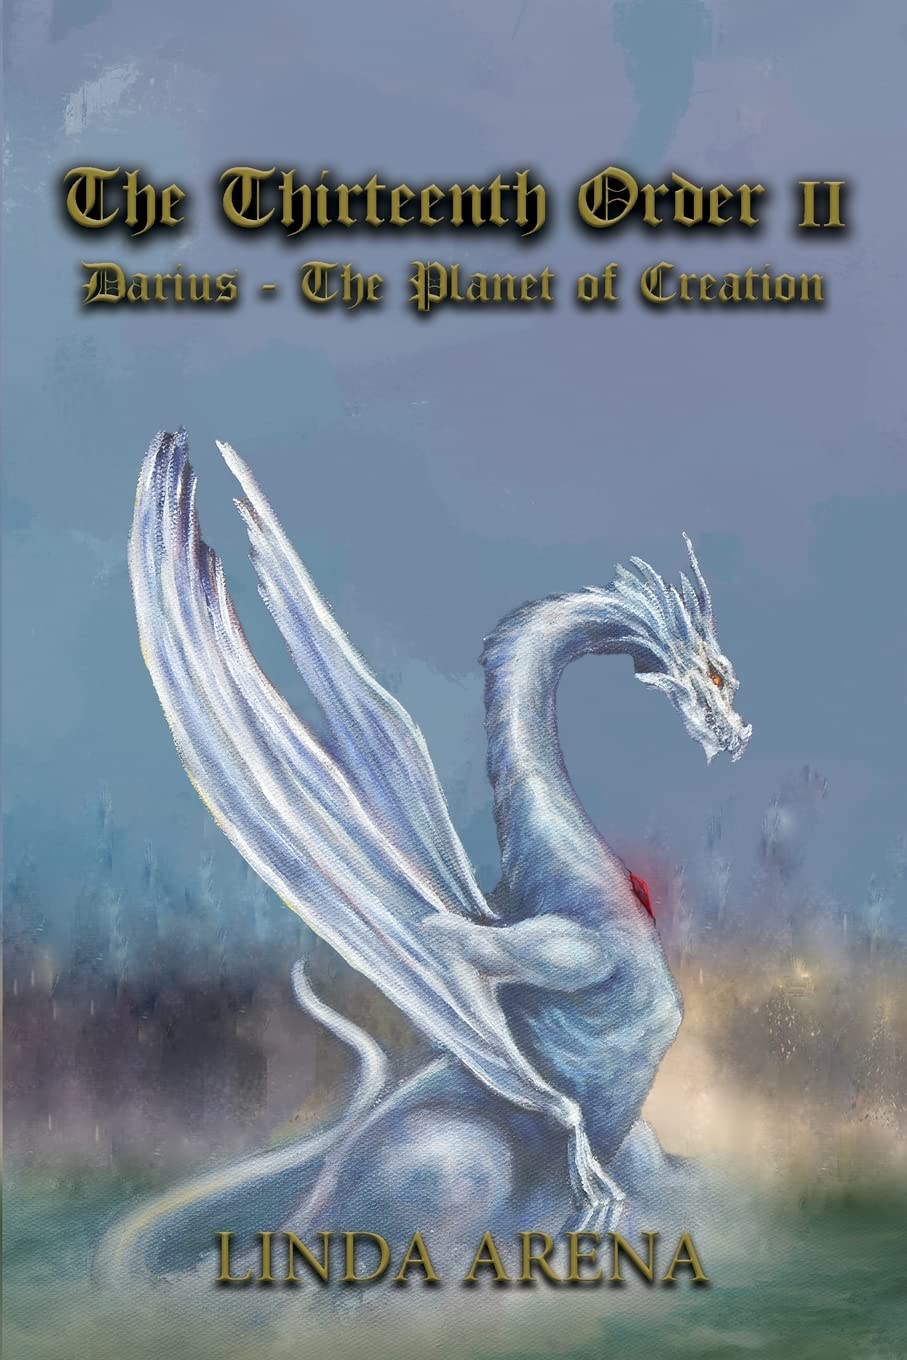 Author's Tranquility Press presents The Thirteenth Order II: Darius-Planet of Creation, the highly-anticipated sequel to the bestselling novel